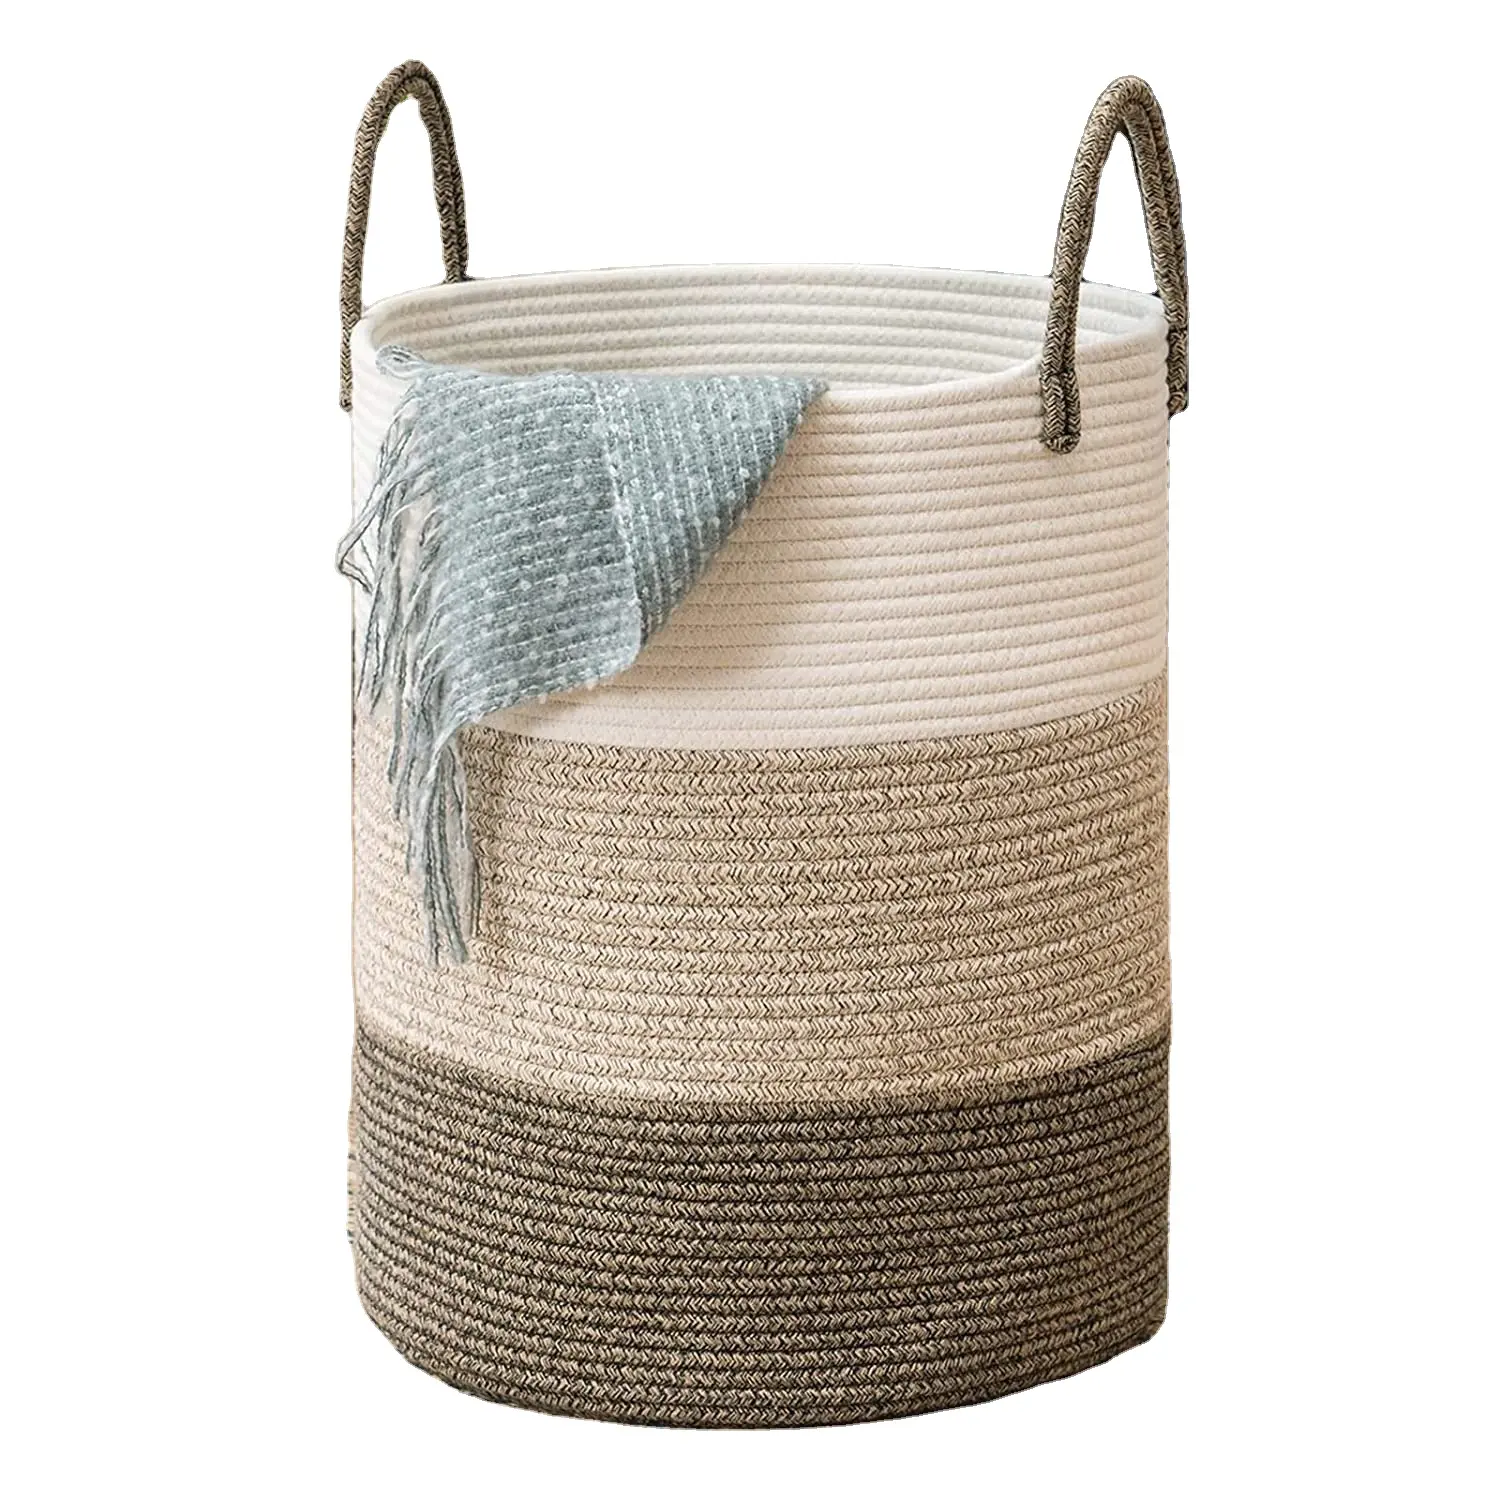 Customize your desired storage decoration cotton rope basket woven laundry toys green plants gift basket qingdao factory sale